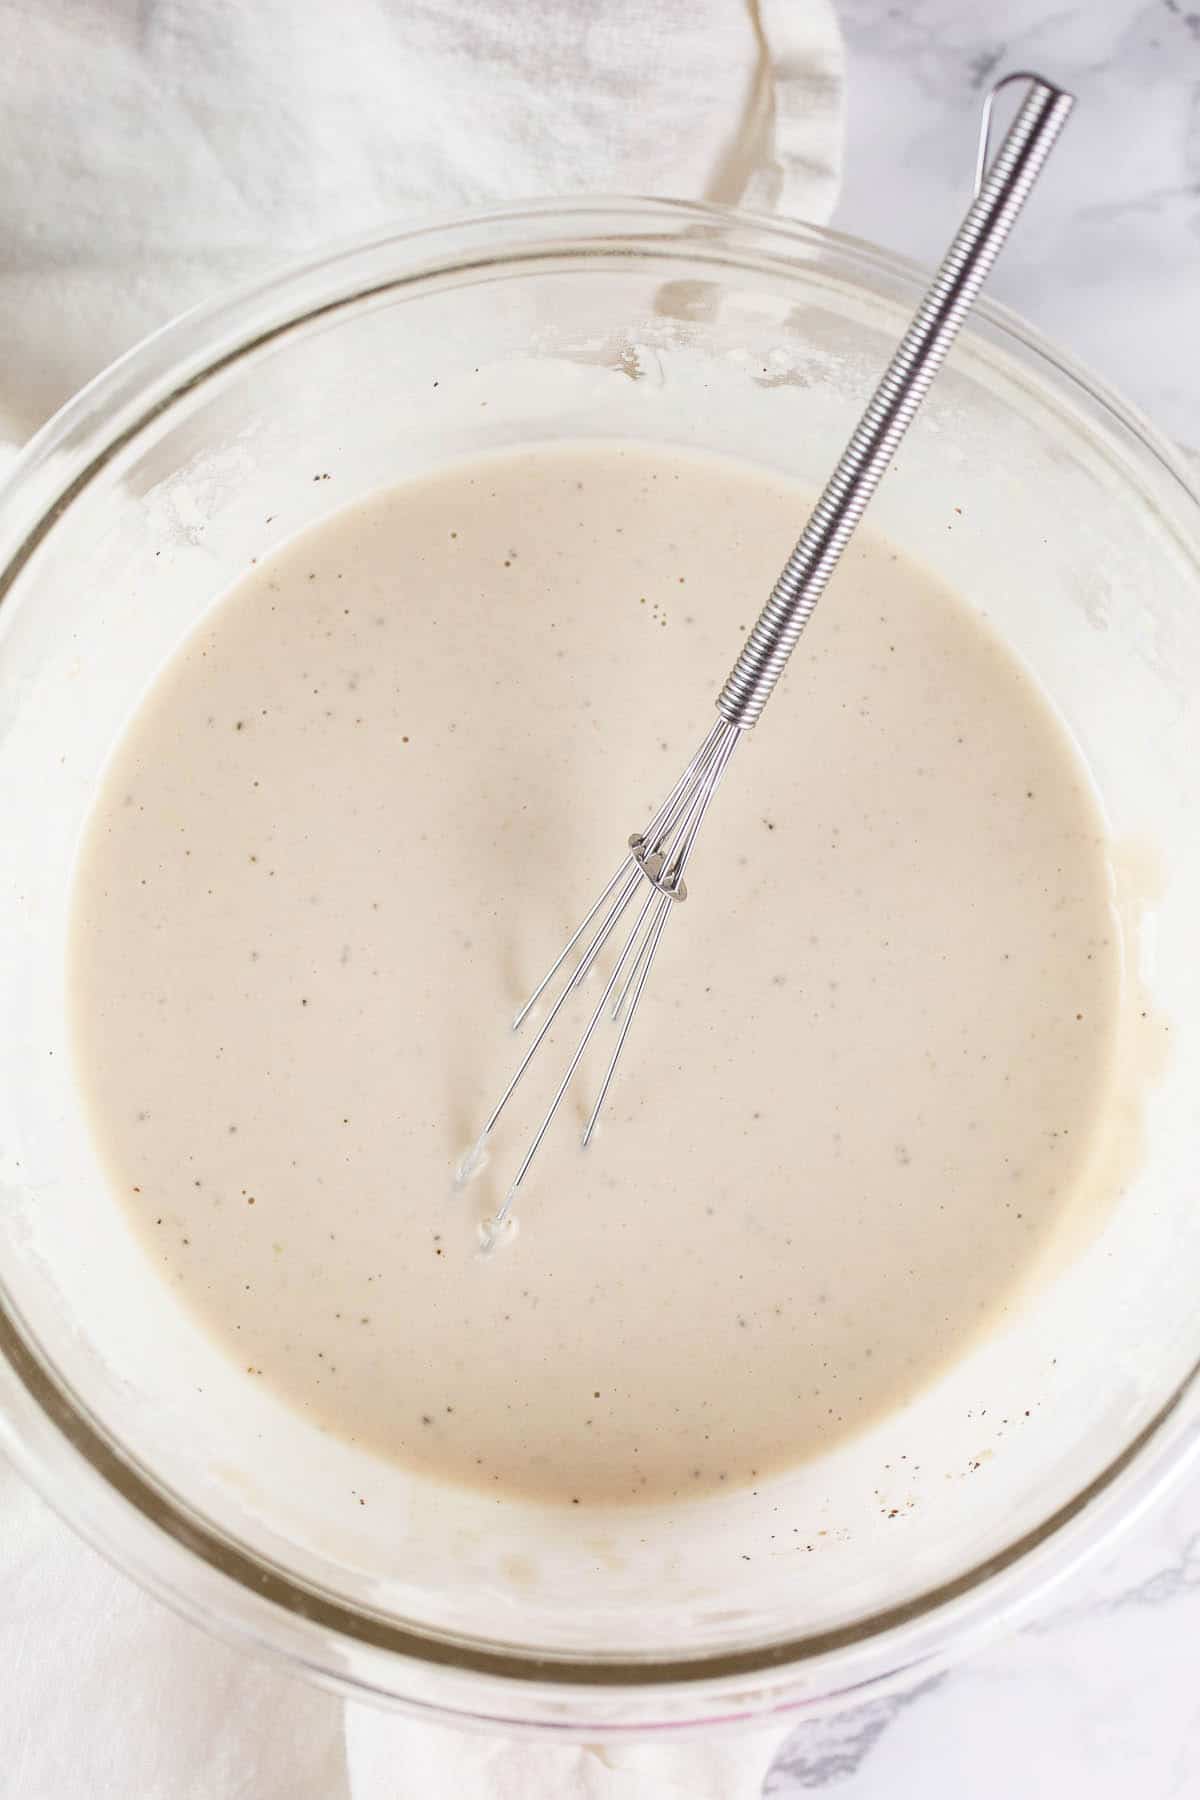 Tahini sauce in small glass bowl with whisk.